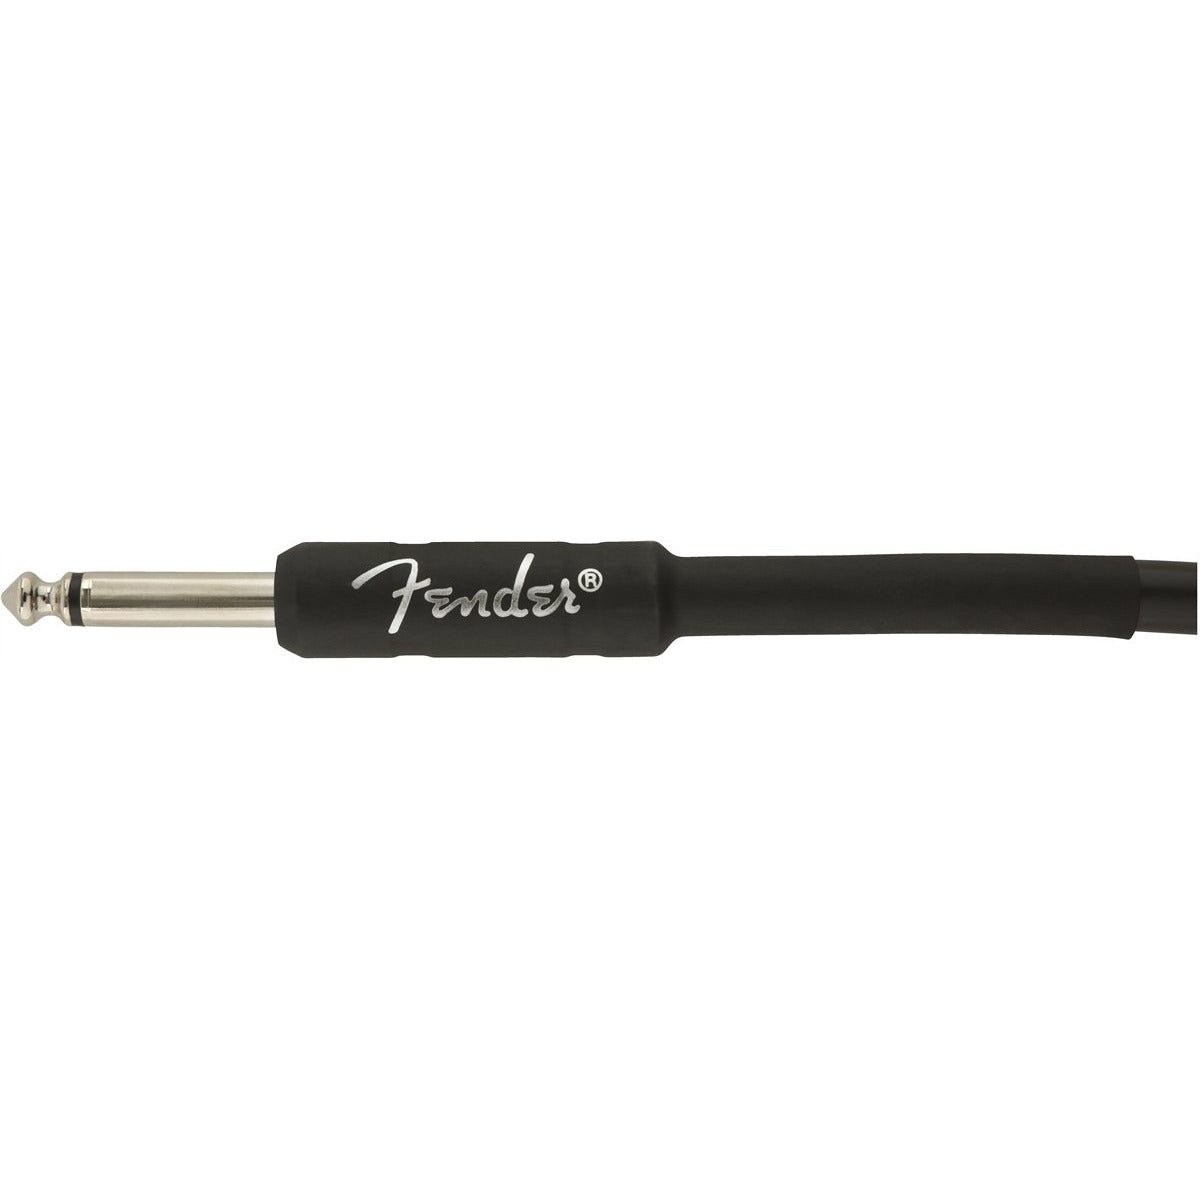 Image 3 of Fender Professional Series Instrument Cable, 18.6', Black - SKU# FPRO-186-B : Product Type Cables & Accessories : Elderly Instruments